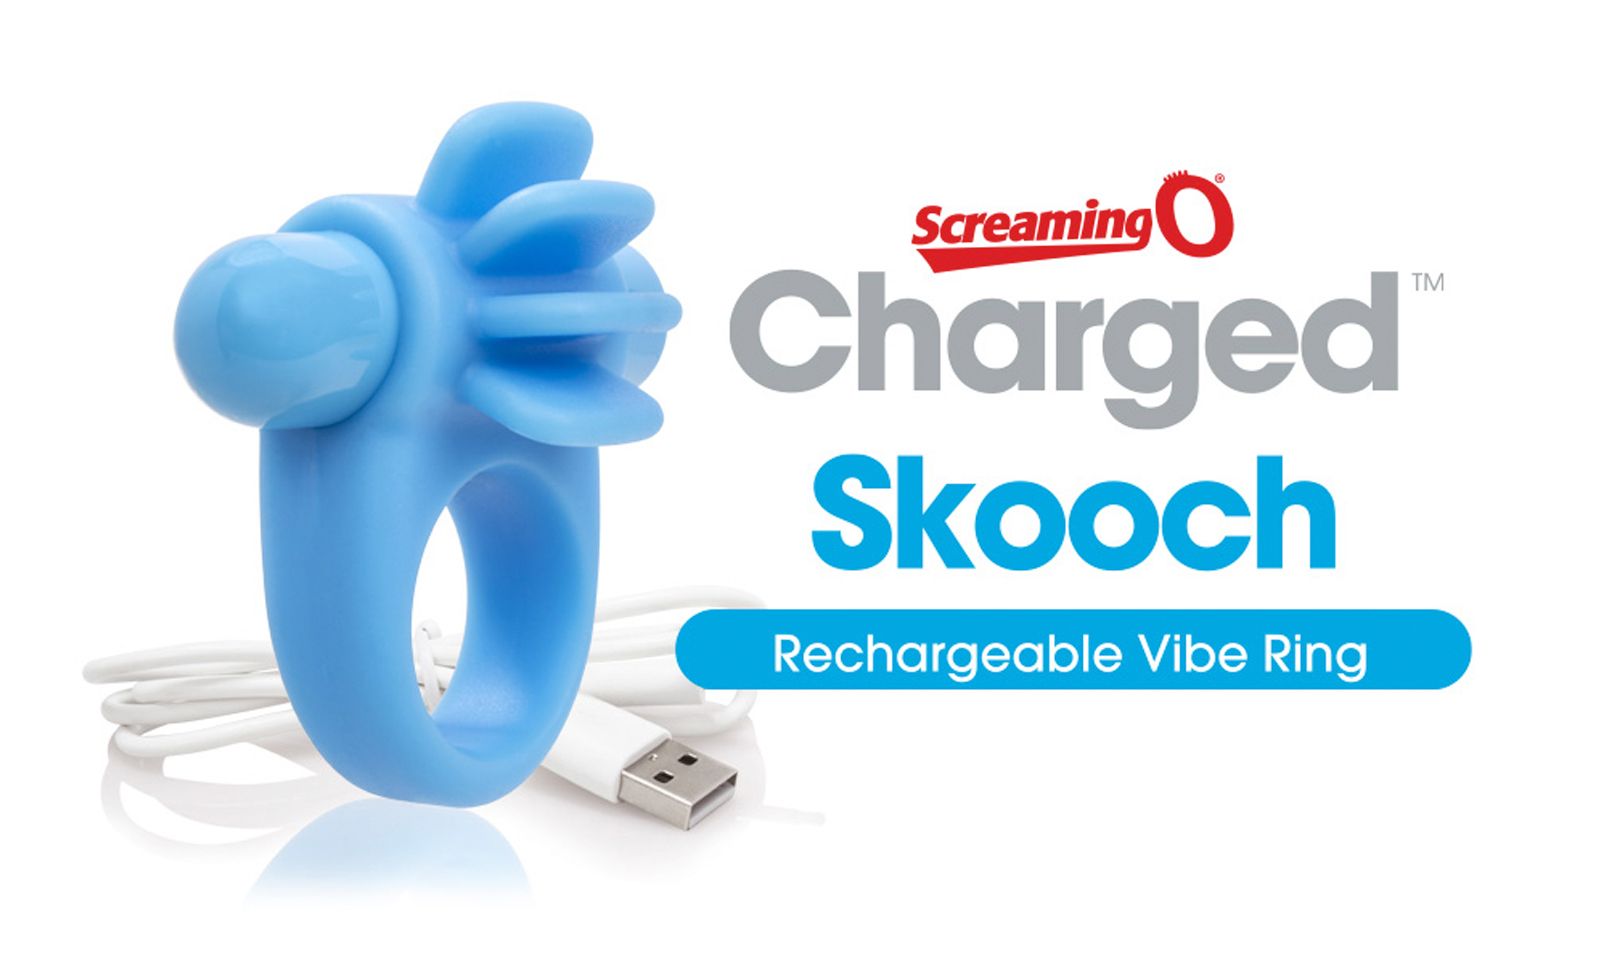 Screaming O’s New Charged Skooch Ring Brings The Buzz